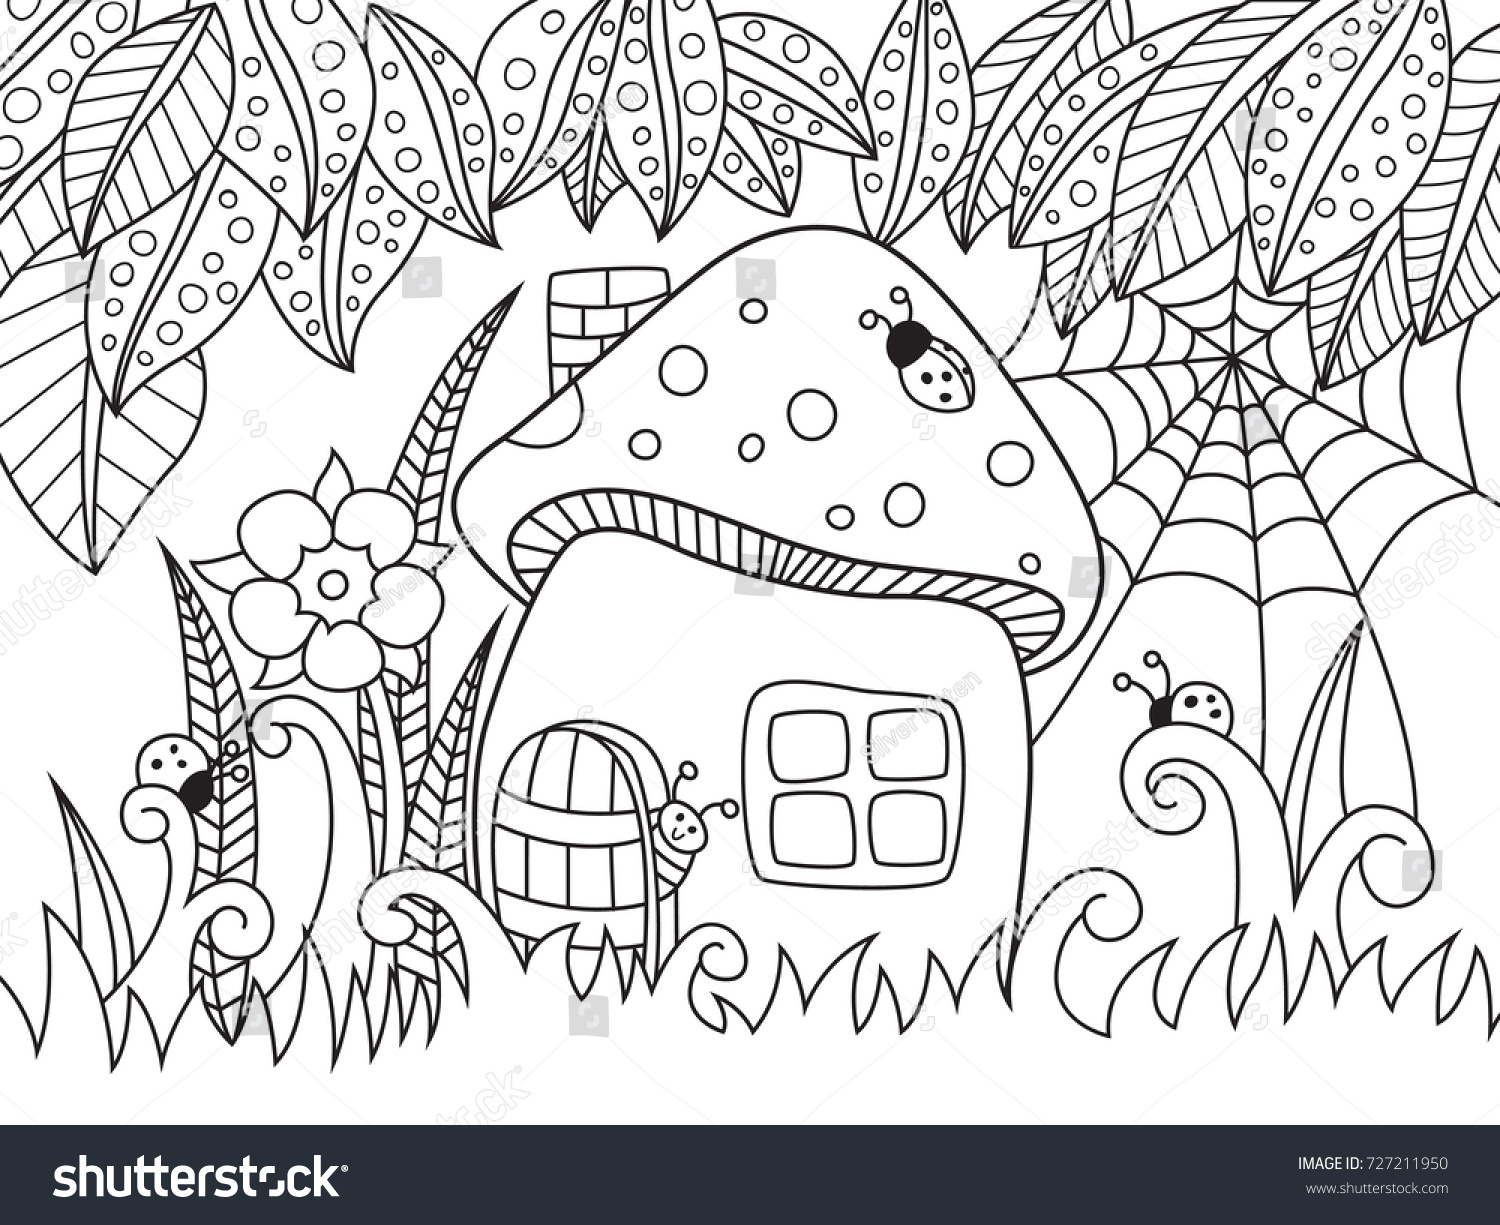 Outlined Doodle Antistress Coloring Page Beautiful Stock Vector ...